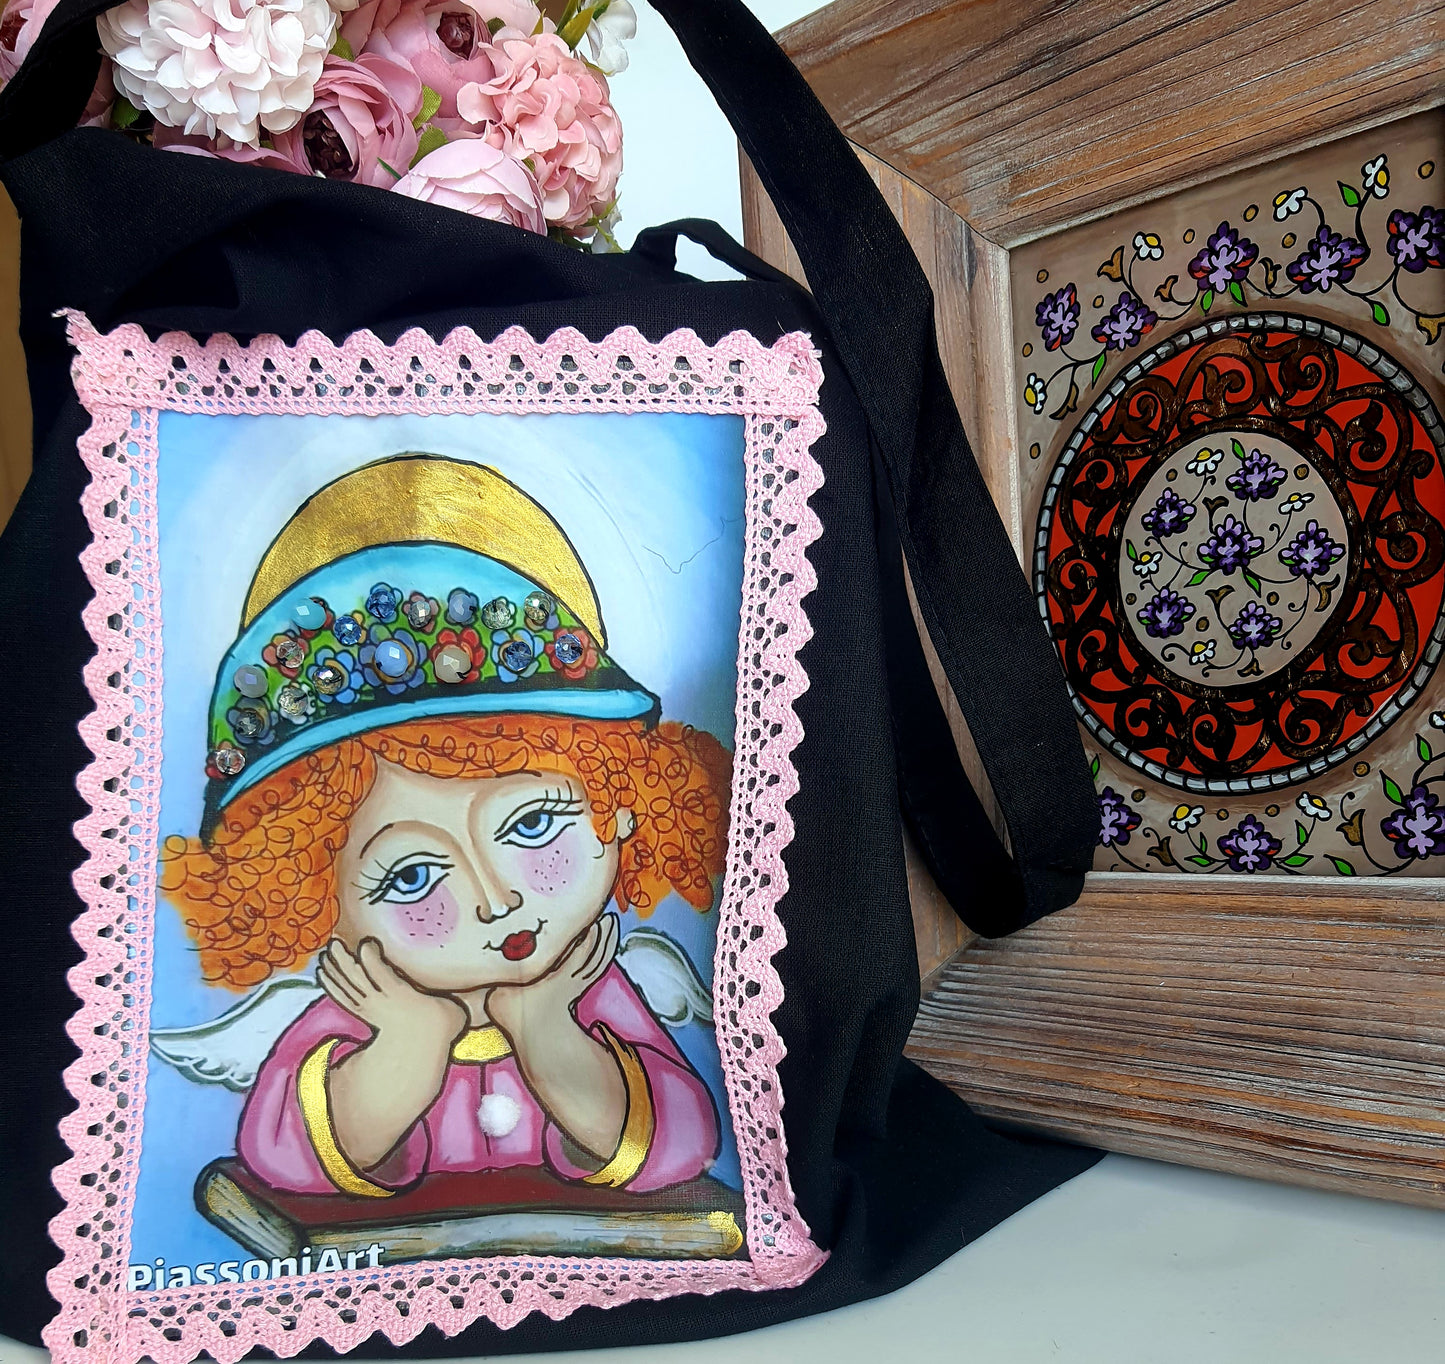 Cotton, Lace and Angel: Style and Art in One Bag!